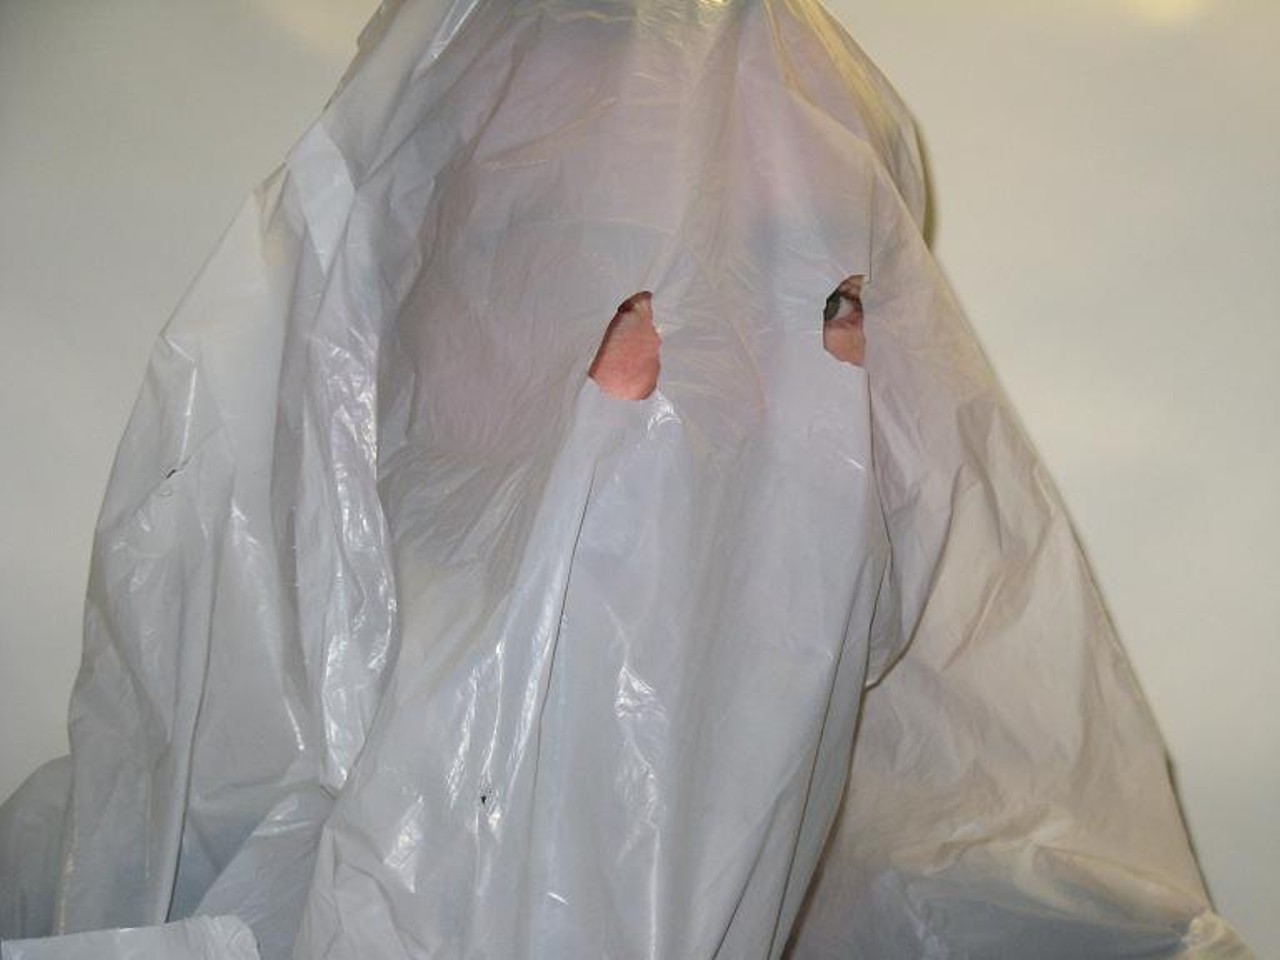 We&rsquo;ll give you two points for cutting holes so you won&rsquo;t suffocate, but we&rsquo;re gonna deduct five for being the lamest ghost ever and another 3,862 for looking a little too much like a raging racist.